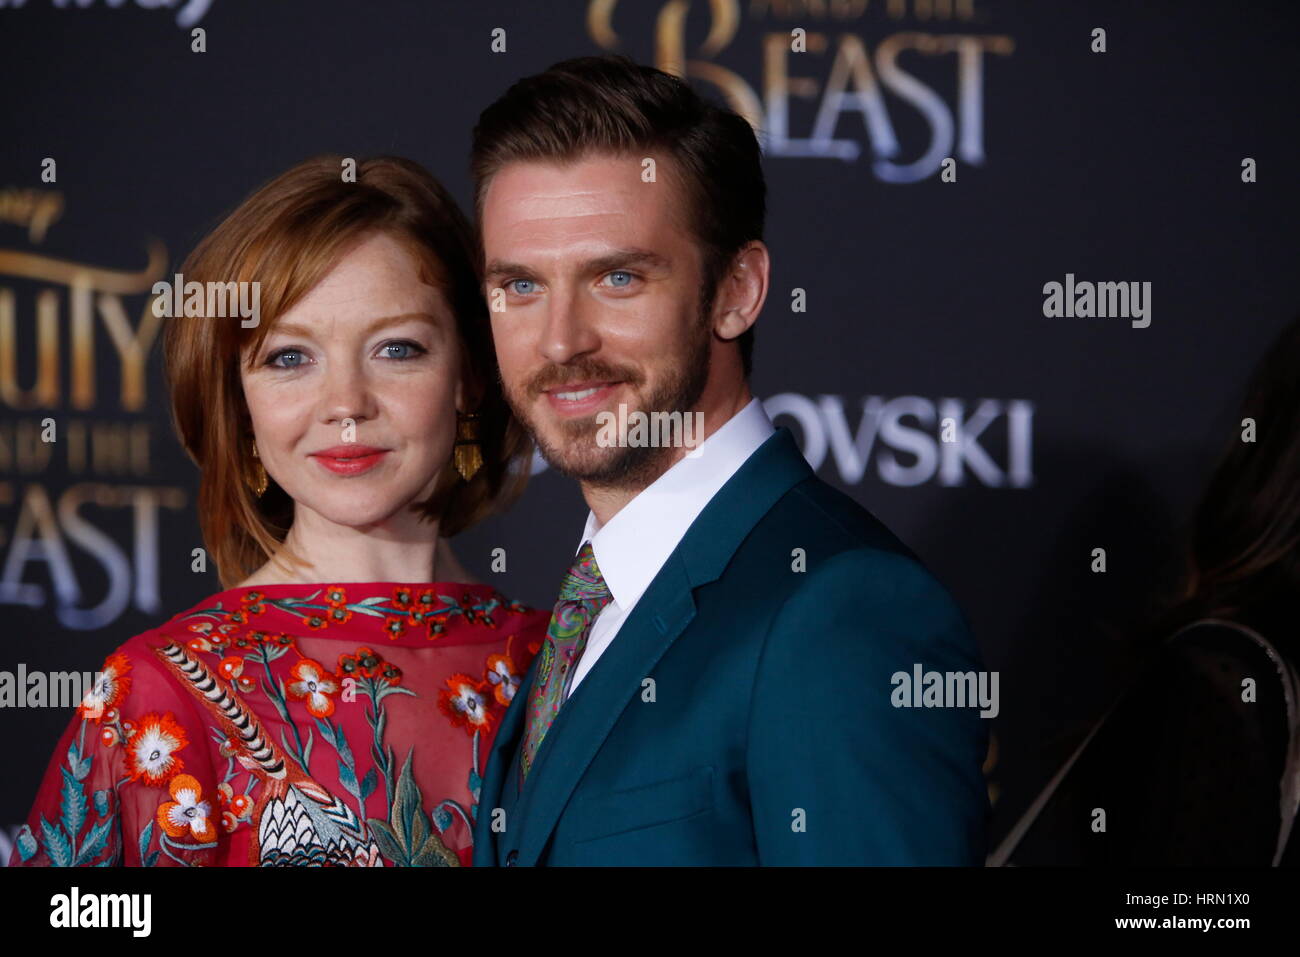 Los Angeles, Us. 03rd Mar, 2017. Dan Stevens and Susie Hariet attend the World Premiere of Disney's 'Beauty And The Beast' at El Capitan Theatre in Los Angeles, USA, on 02 March 2017. Photo: Hubert Boesl - NO WIRE SERVICE - Photo: Hubert Boesl/dpa/Alamy Live News Stock Photo